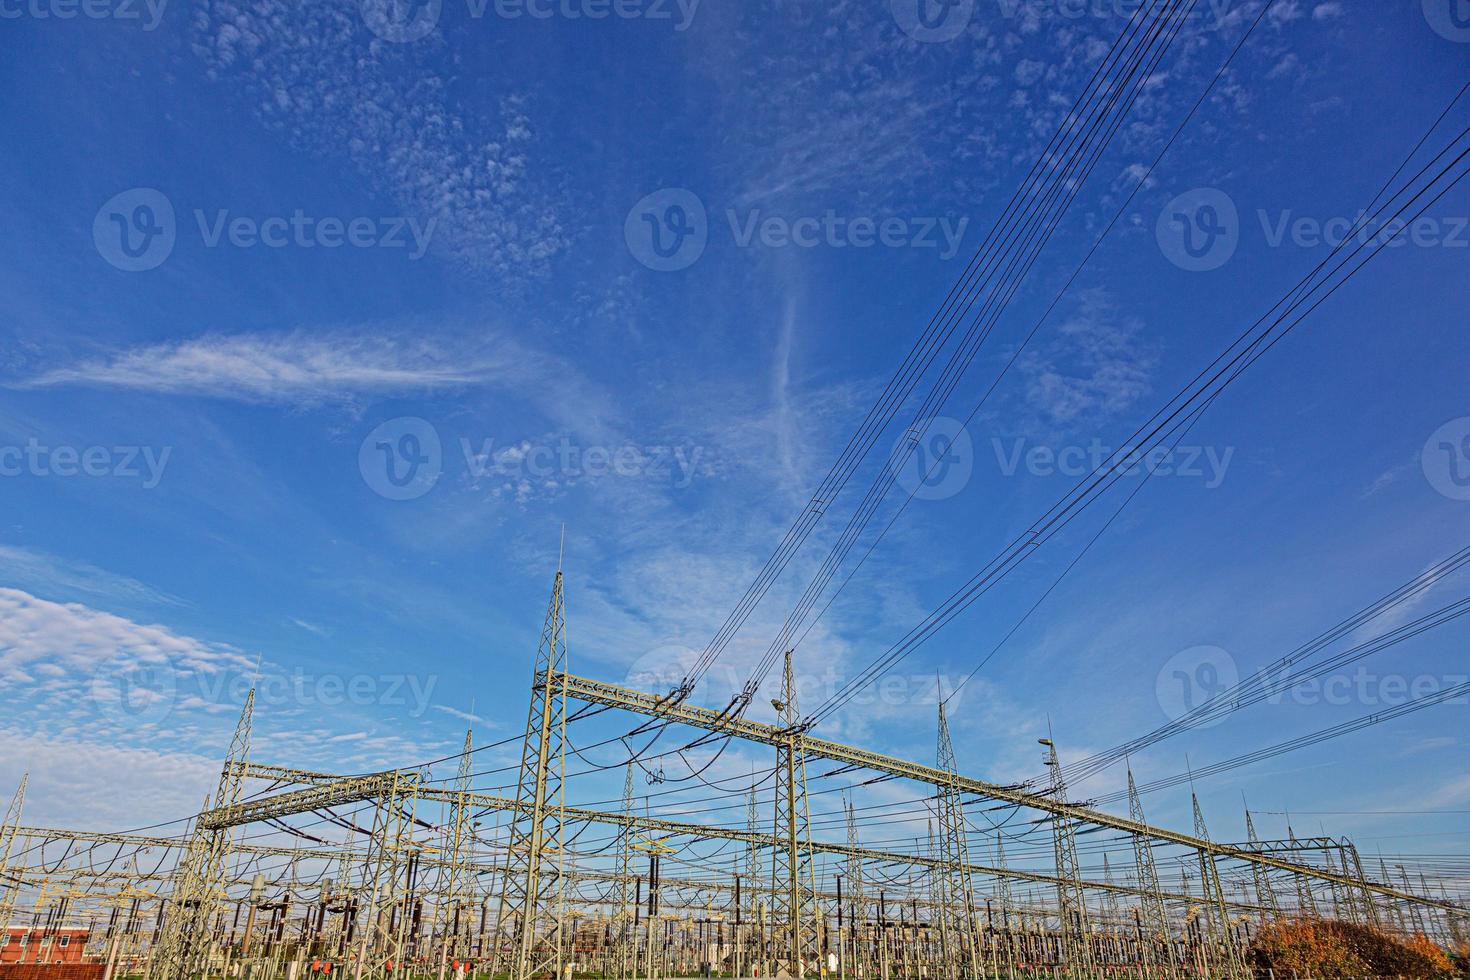 Picture of a transformer station with many insulators and cables during the day photo